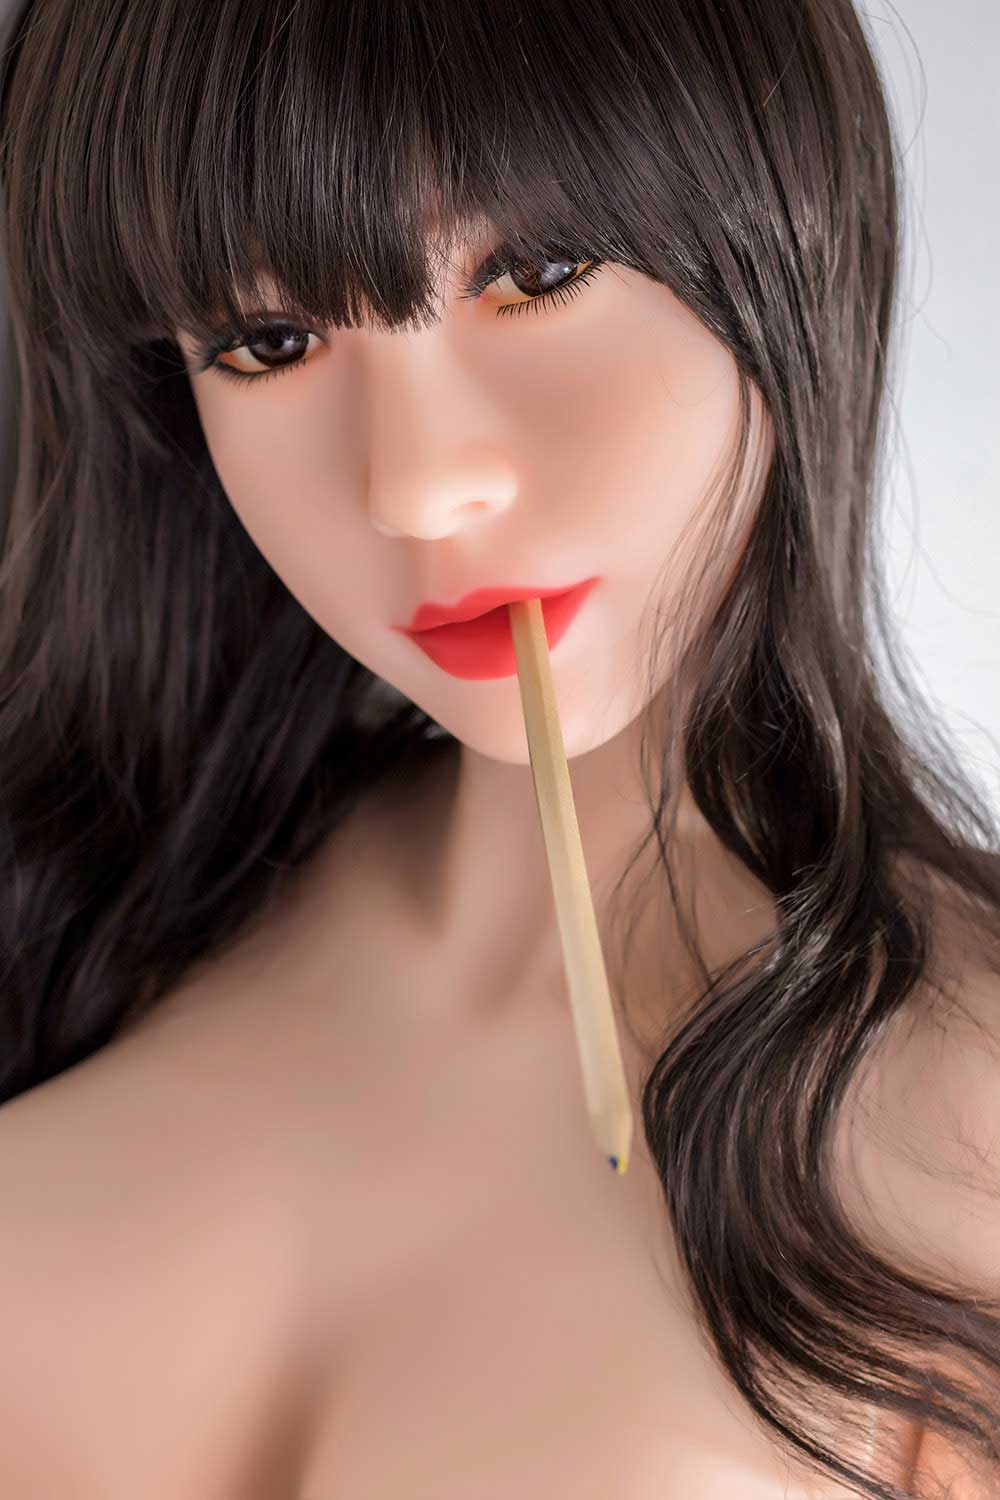 Sex doll with pen in mouth